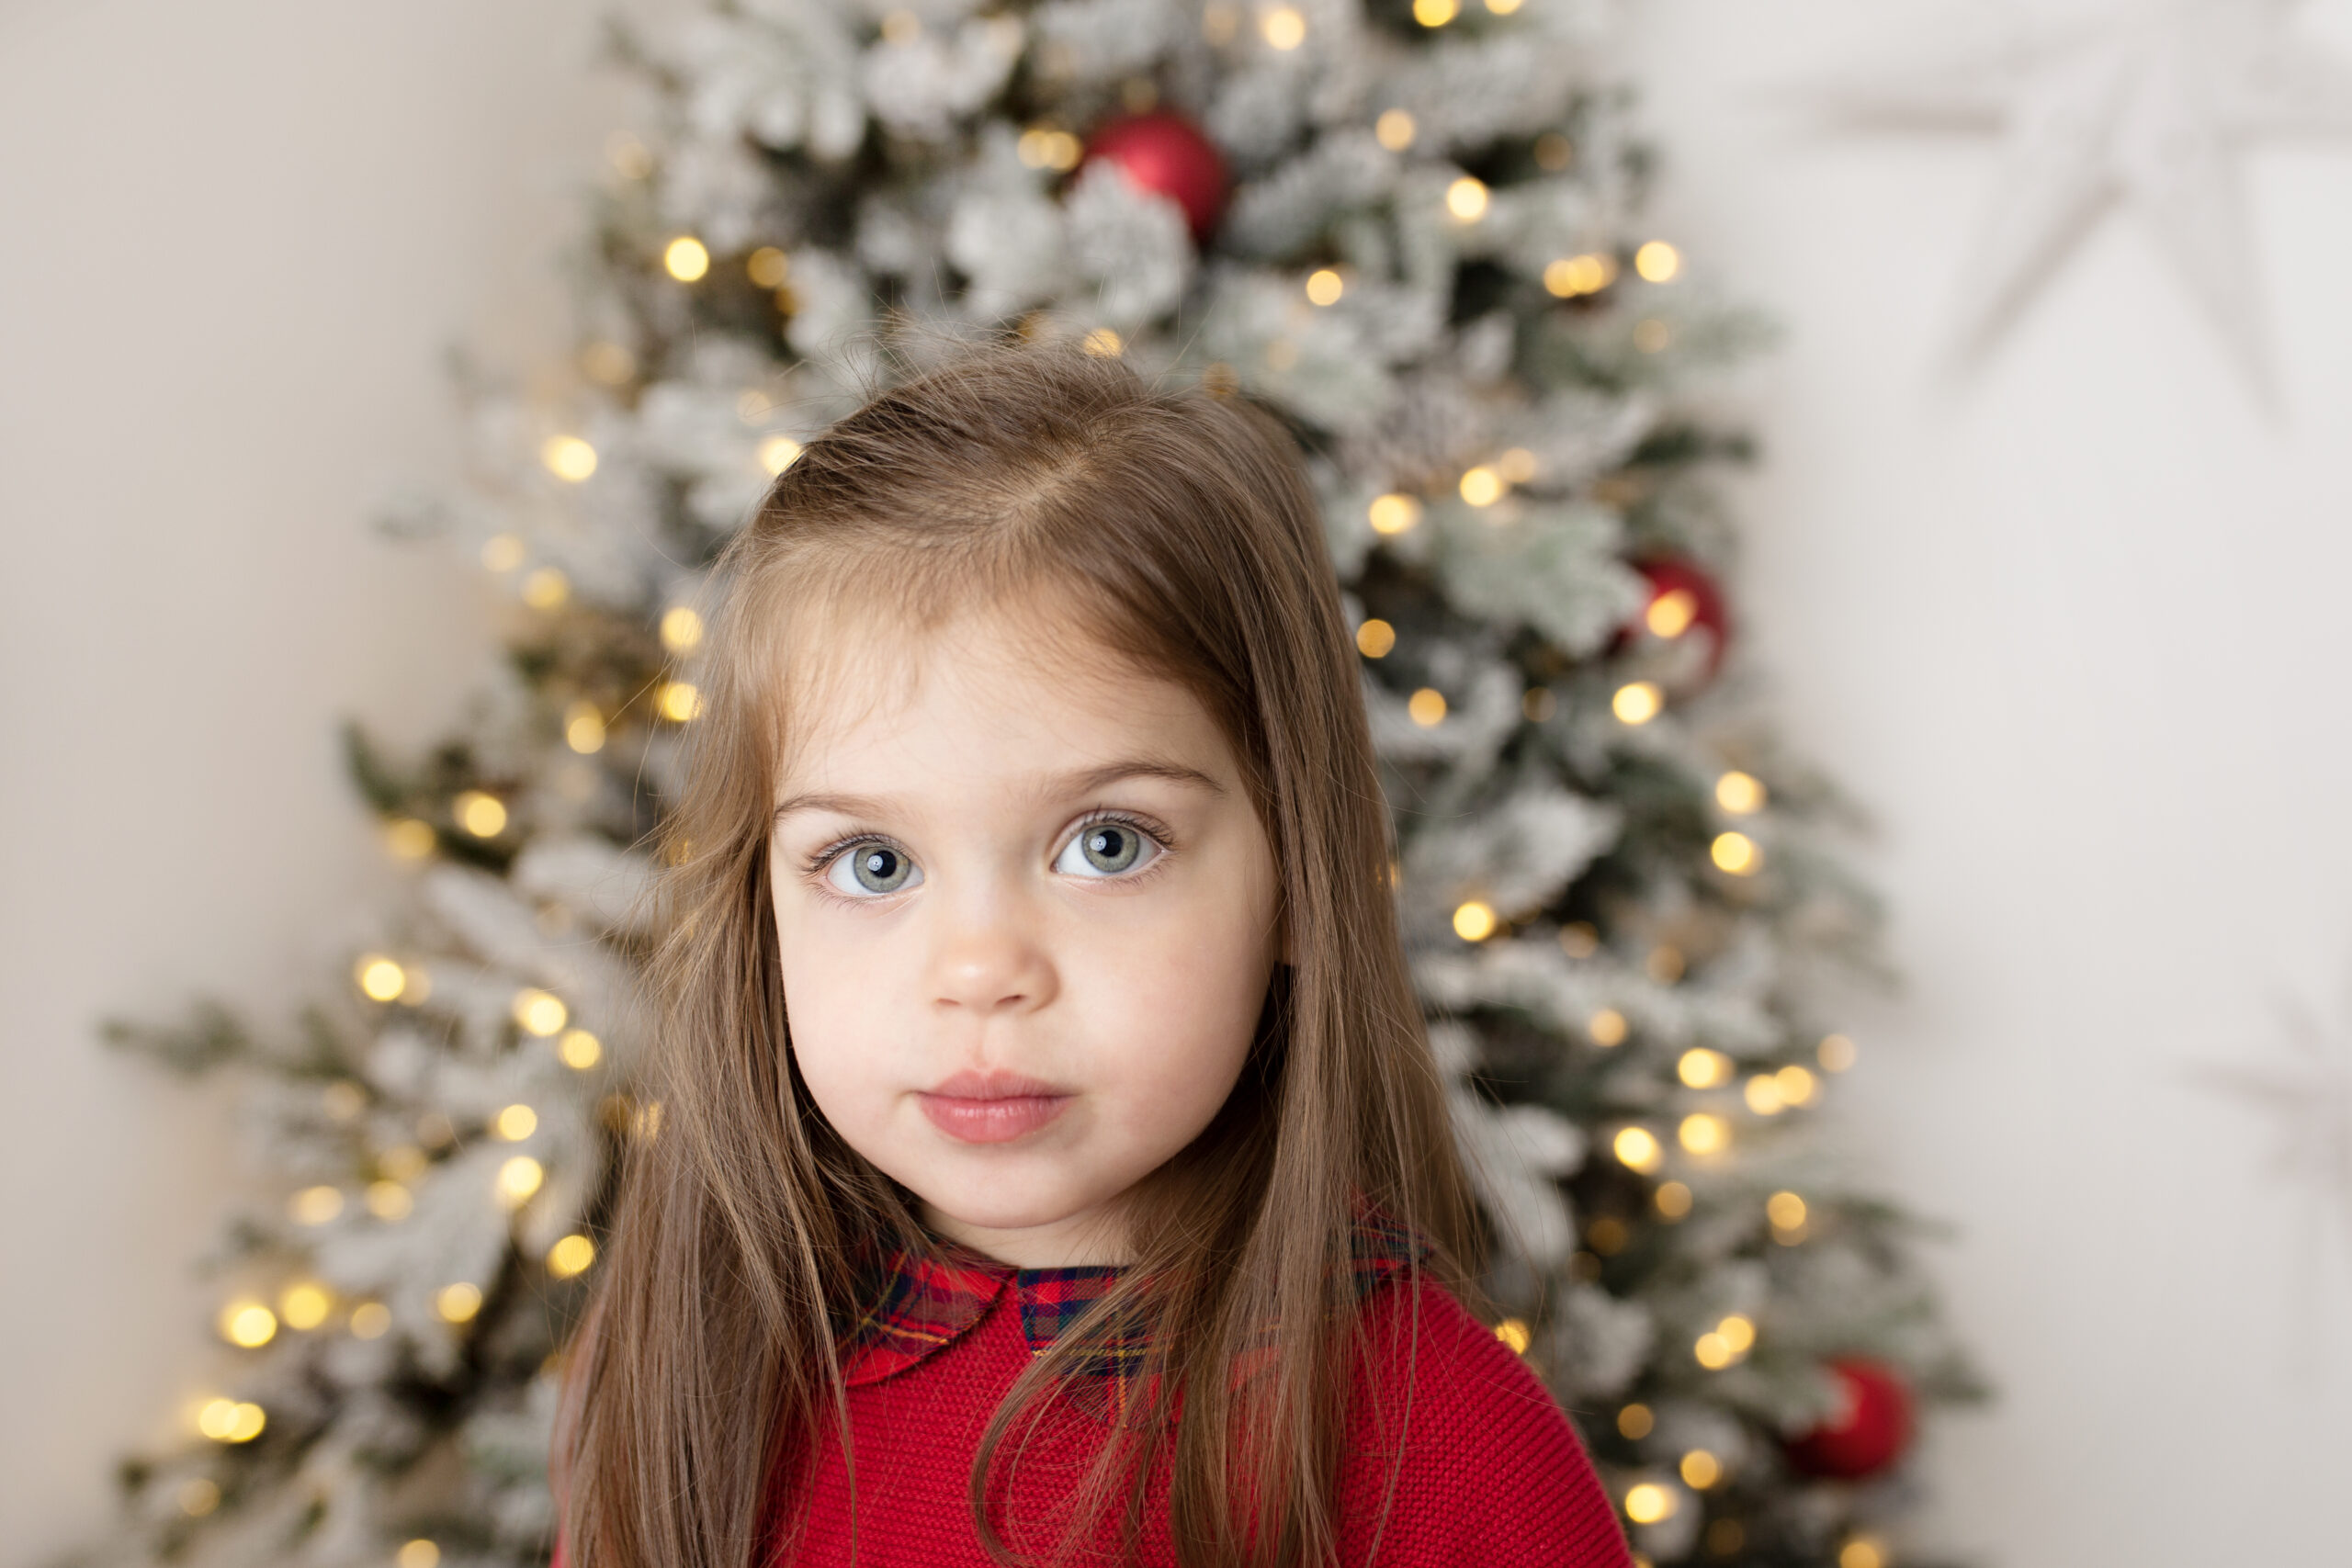 Top tips for taking photos of your kids over the Christmas season